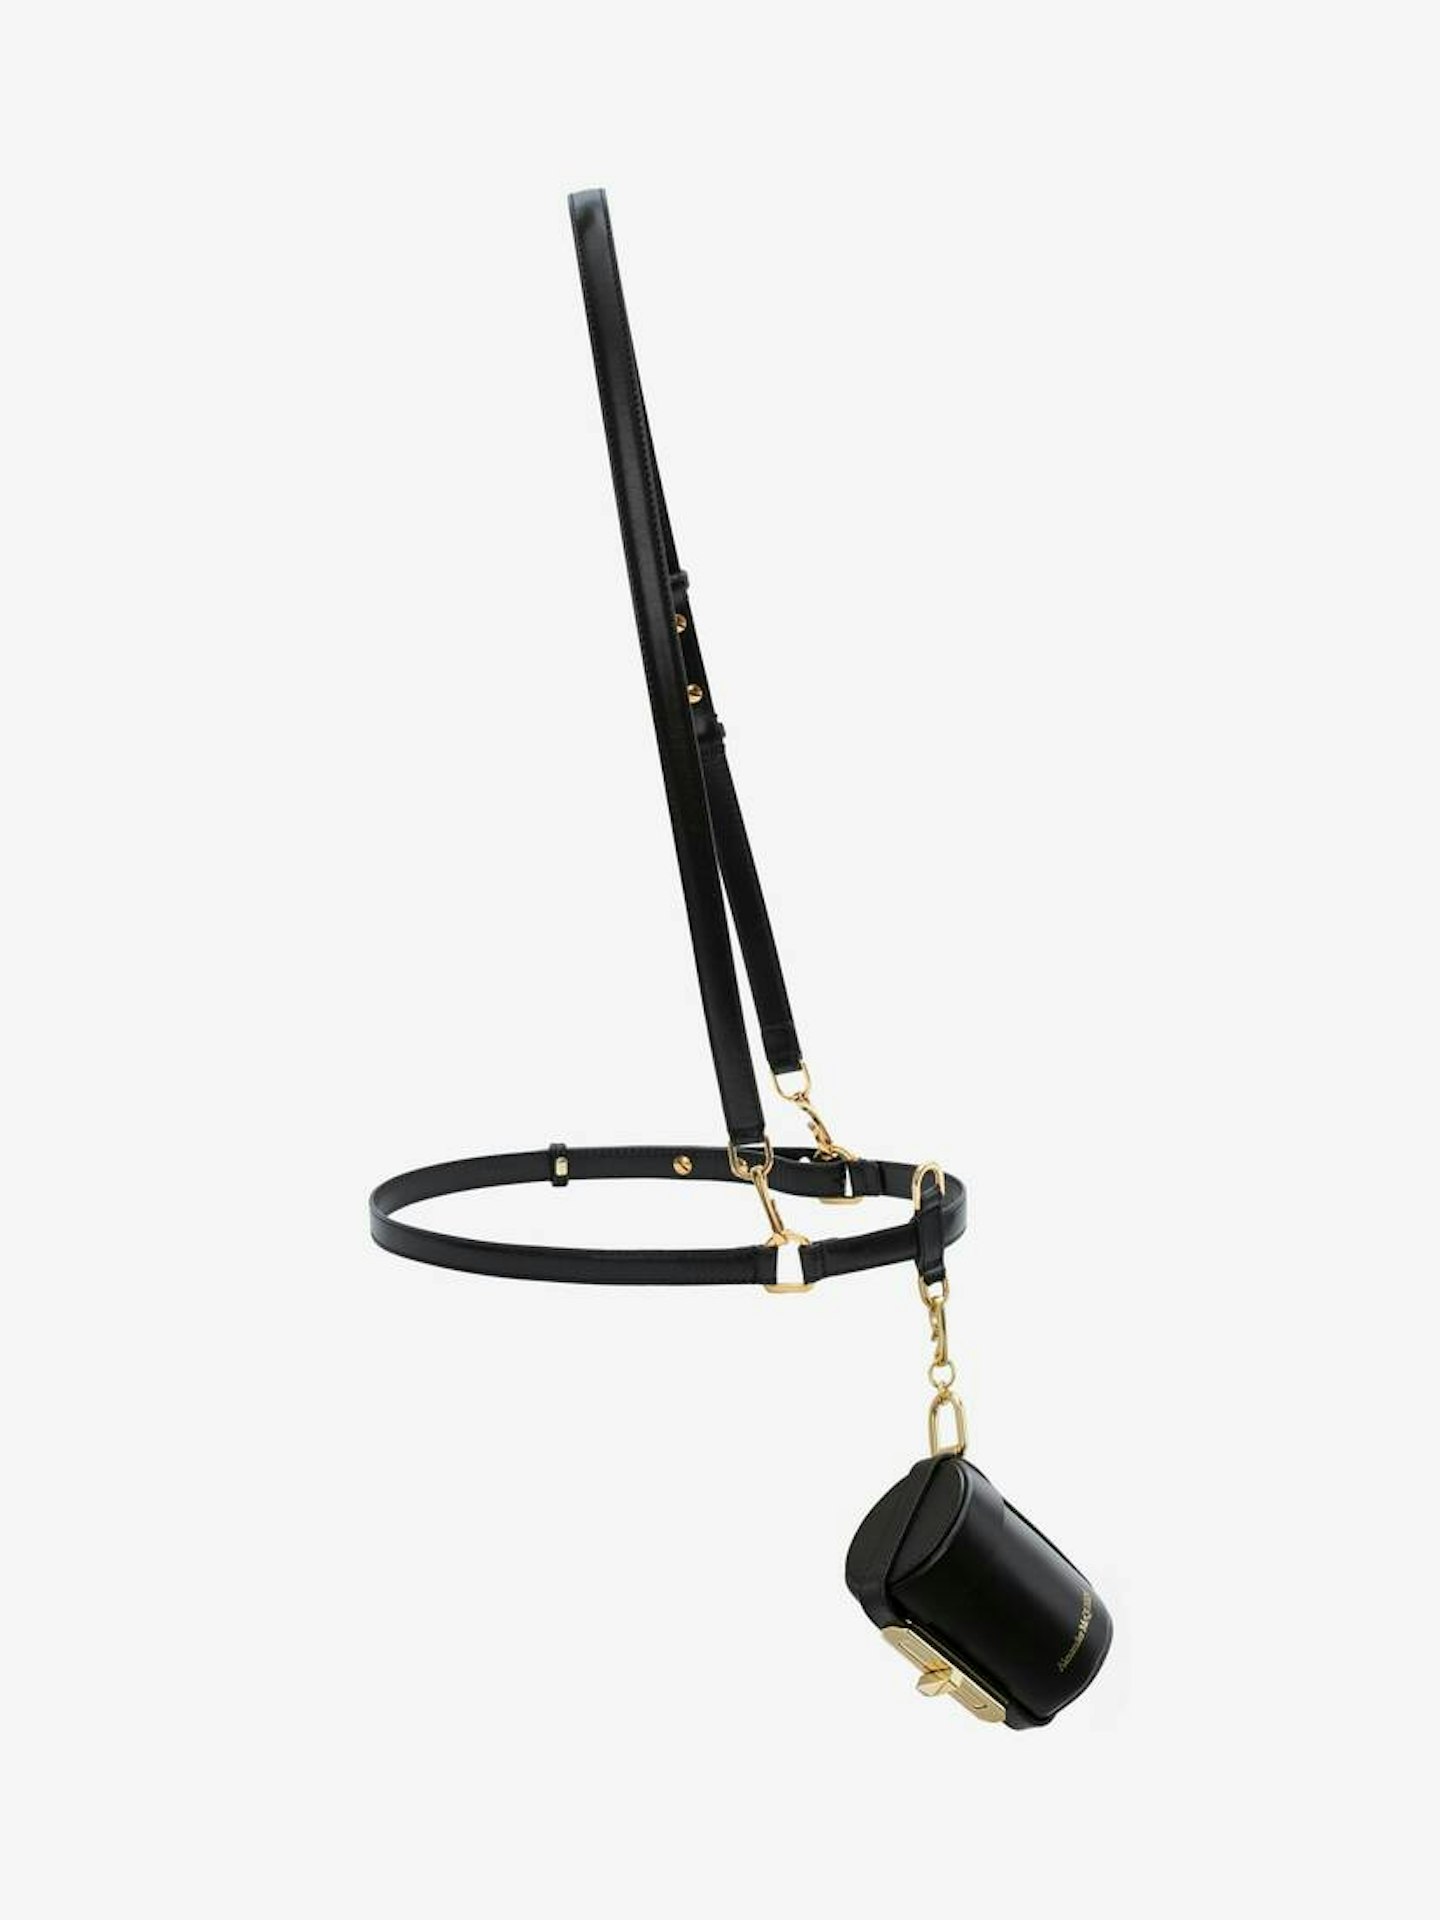 Alexander McQueen, Myth Cylinder With Harness, £1,250